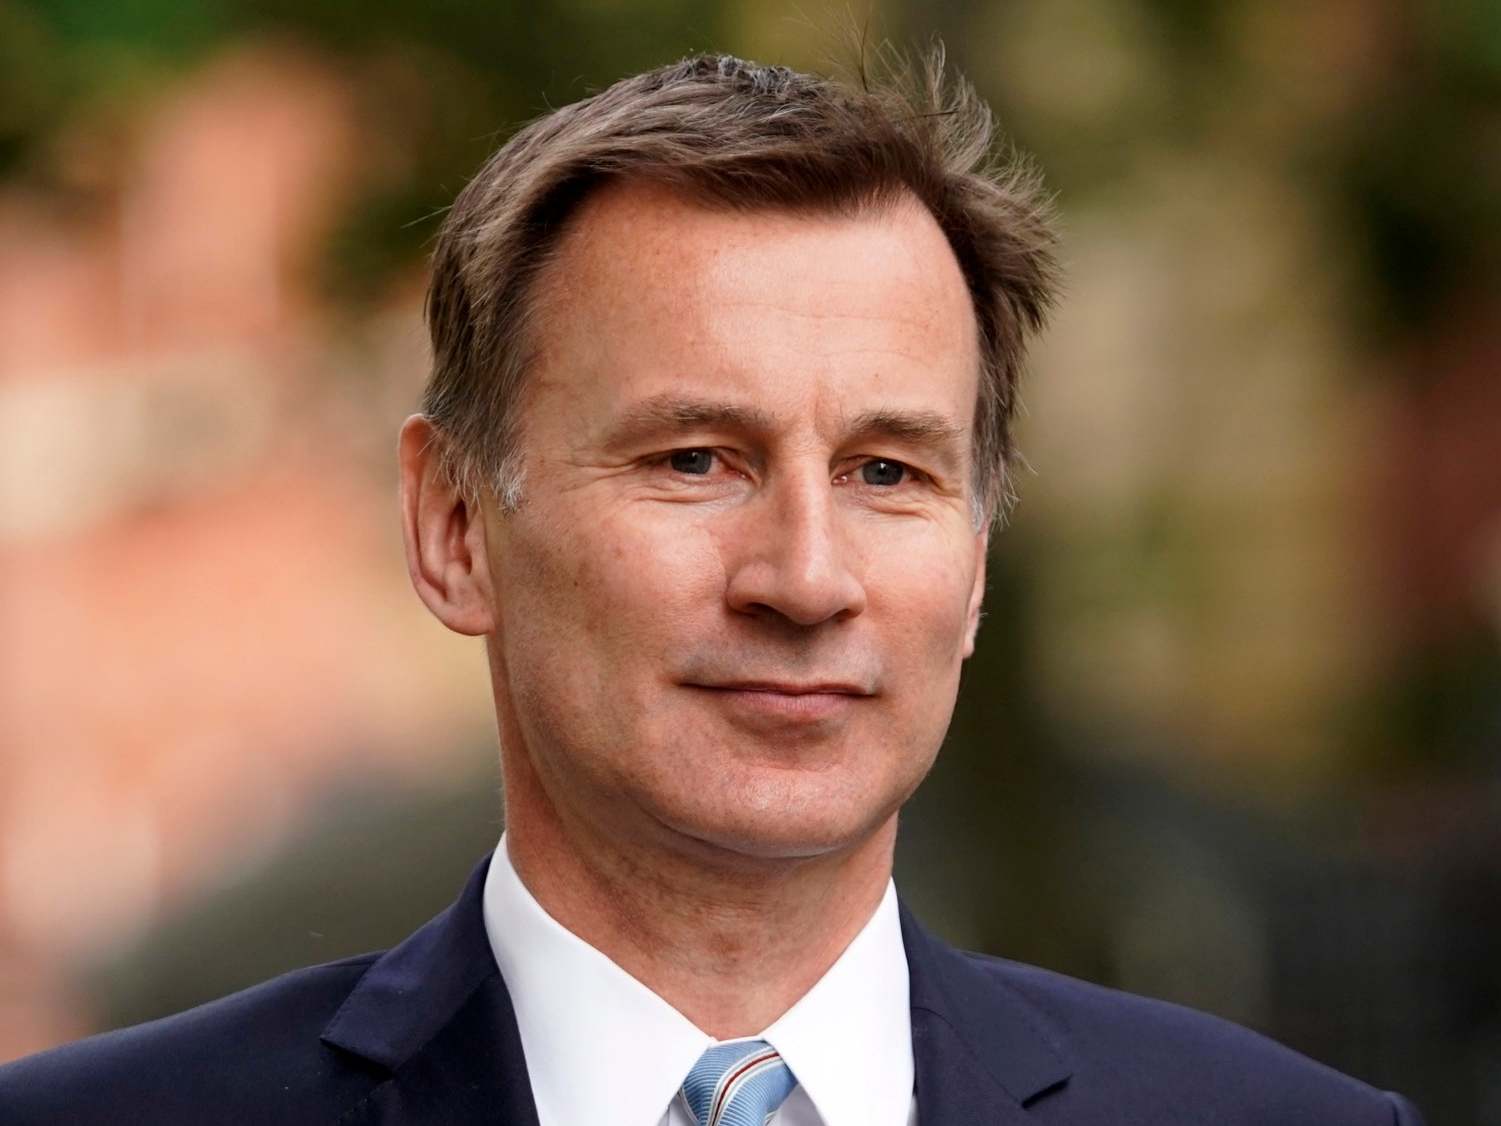 Former health secretary Jeremy Hunt is bidding to become chair of the House of Commons health and social care select committee.